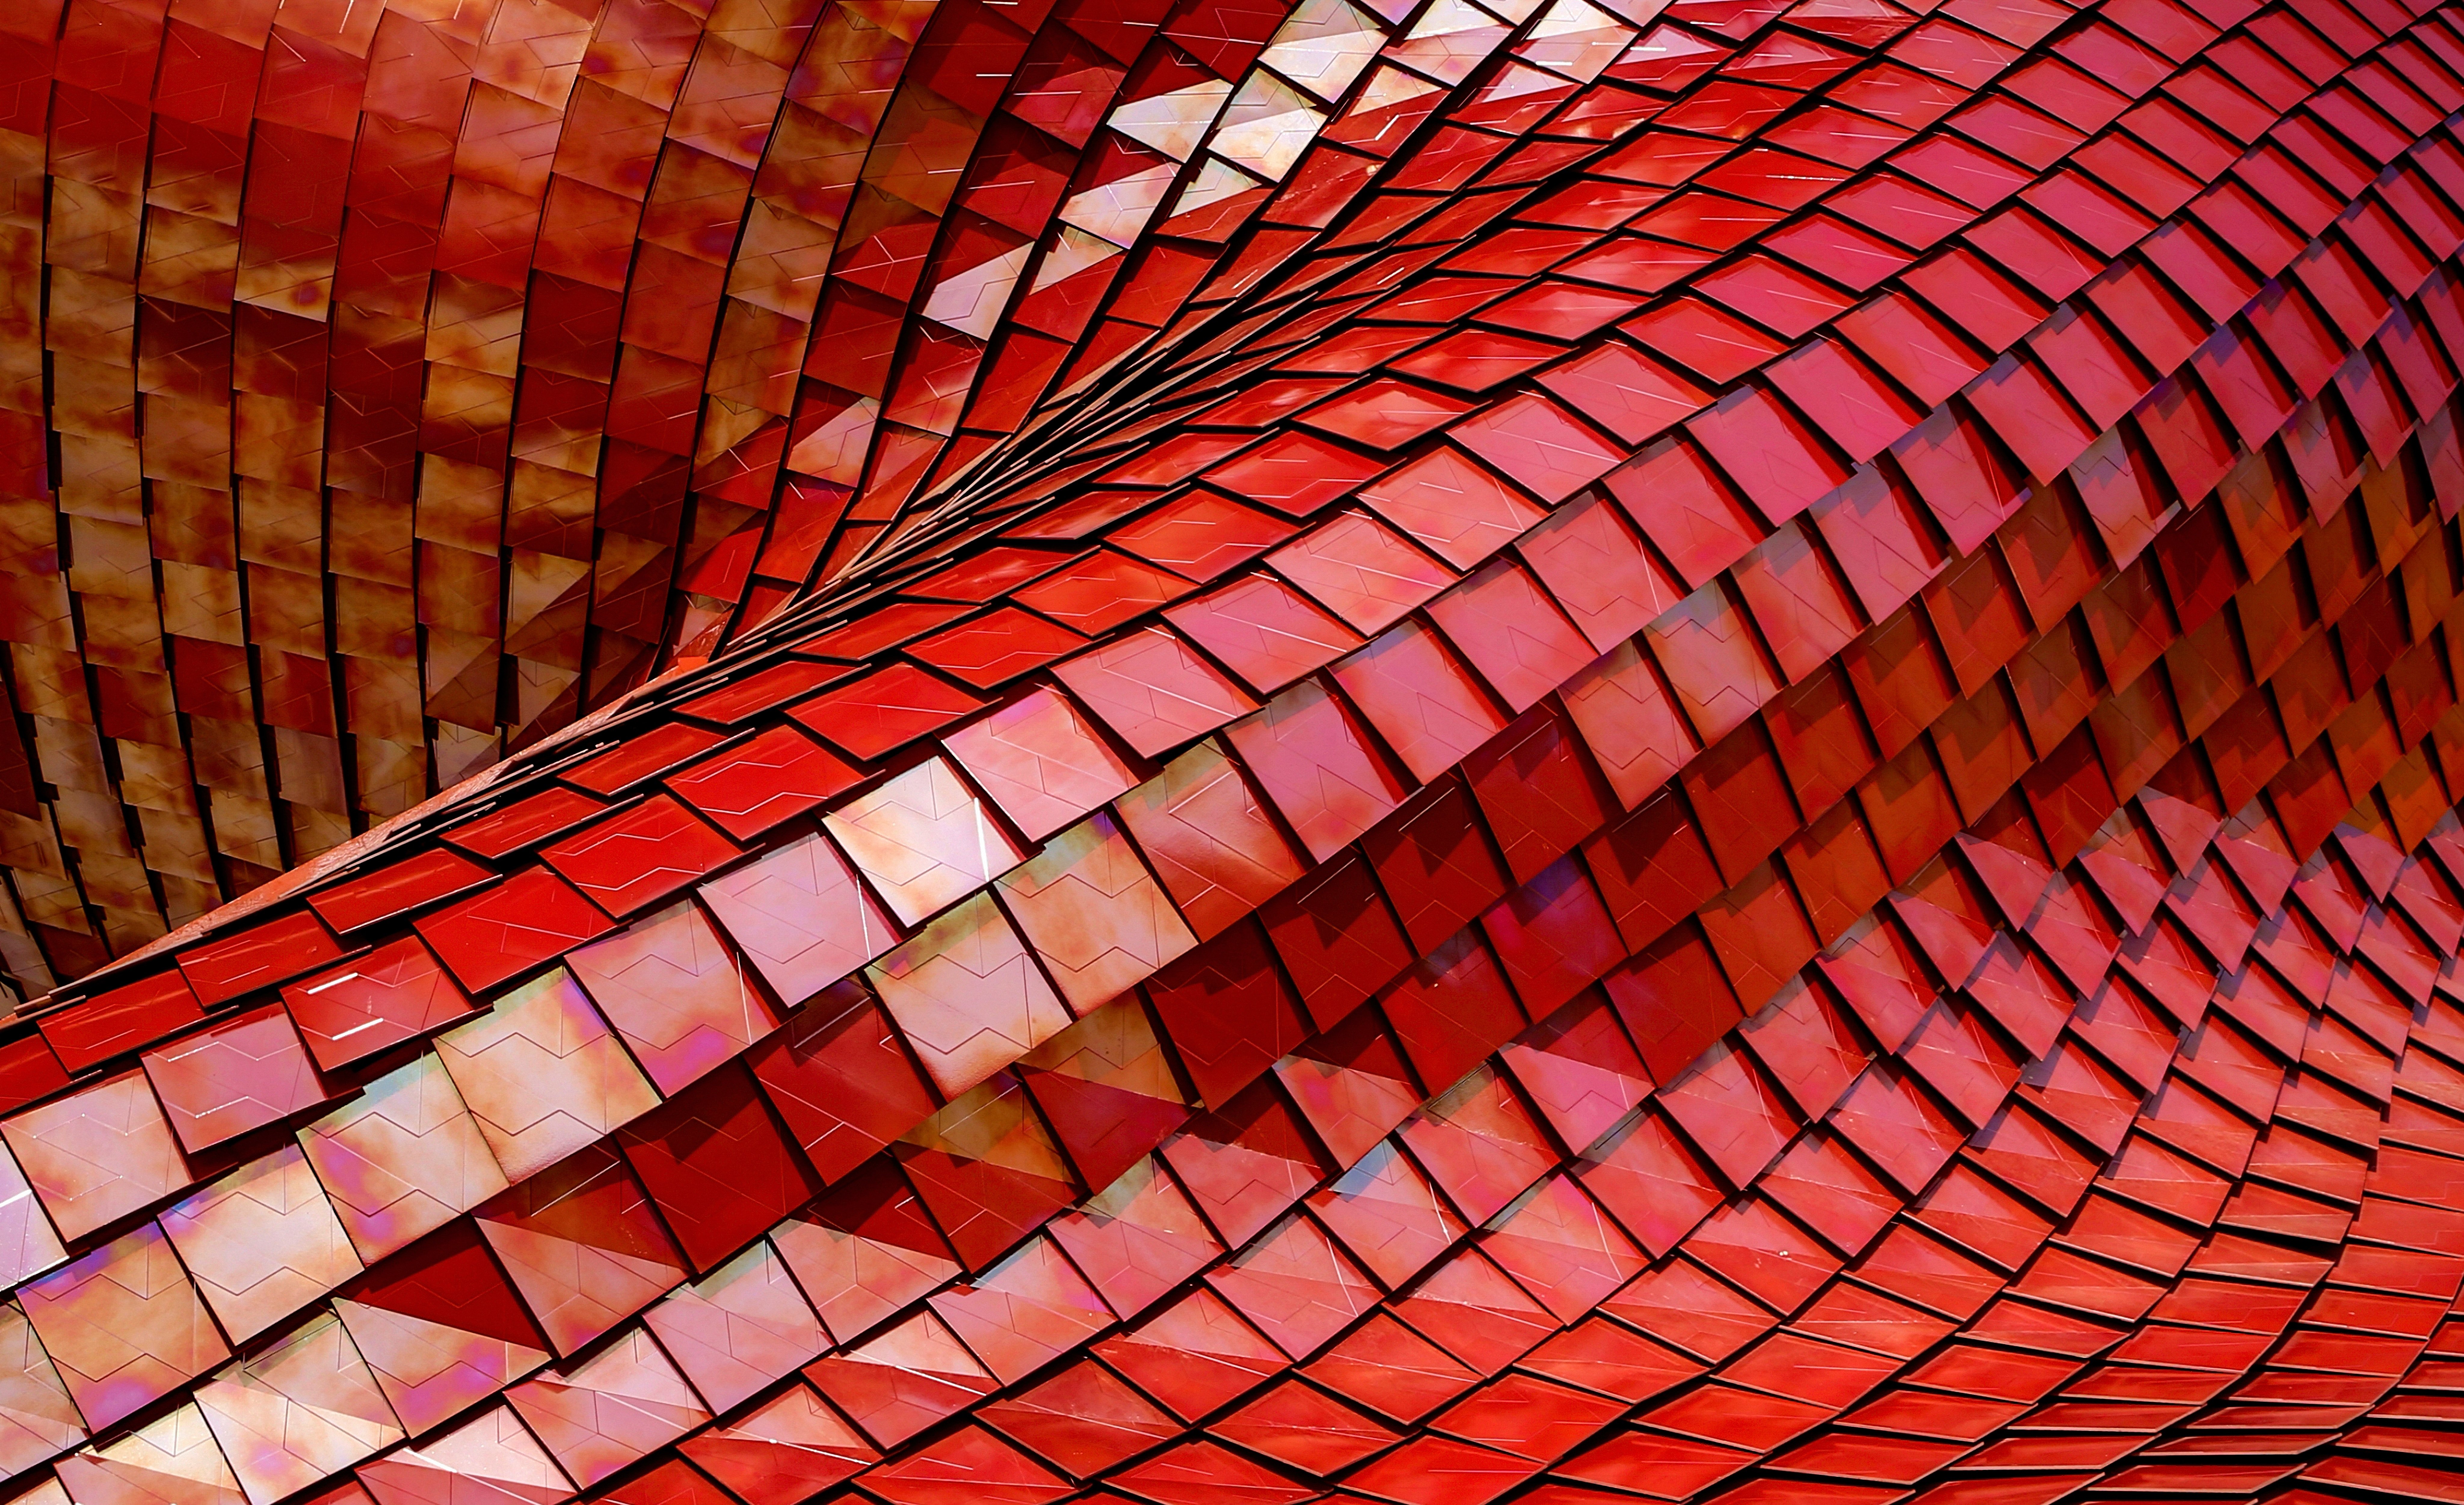 Abstract_Architectural_Red_Wave_P_0056